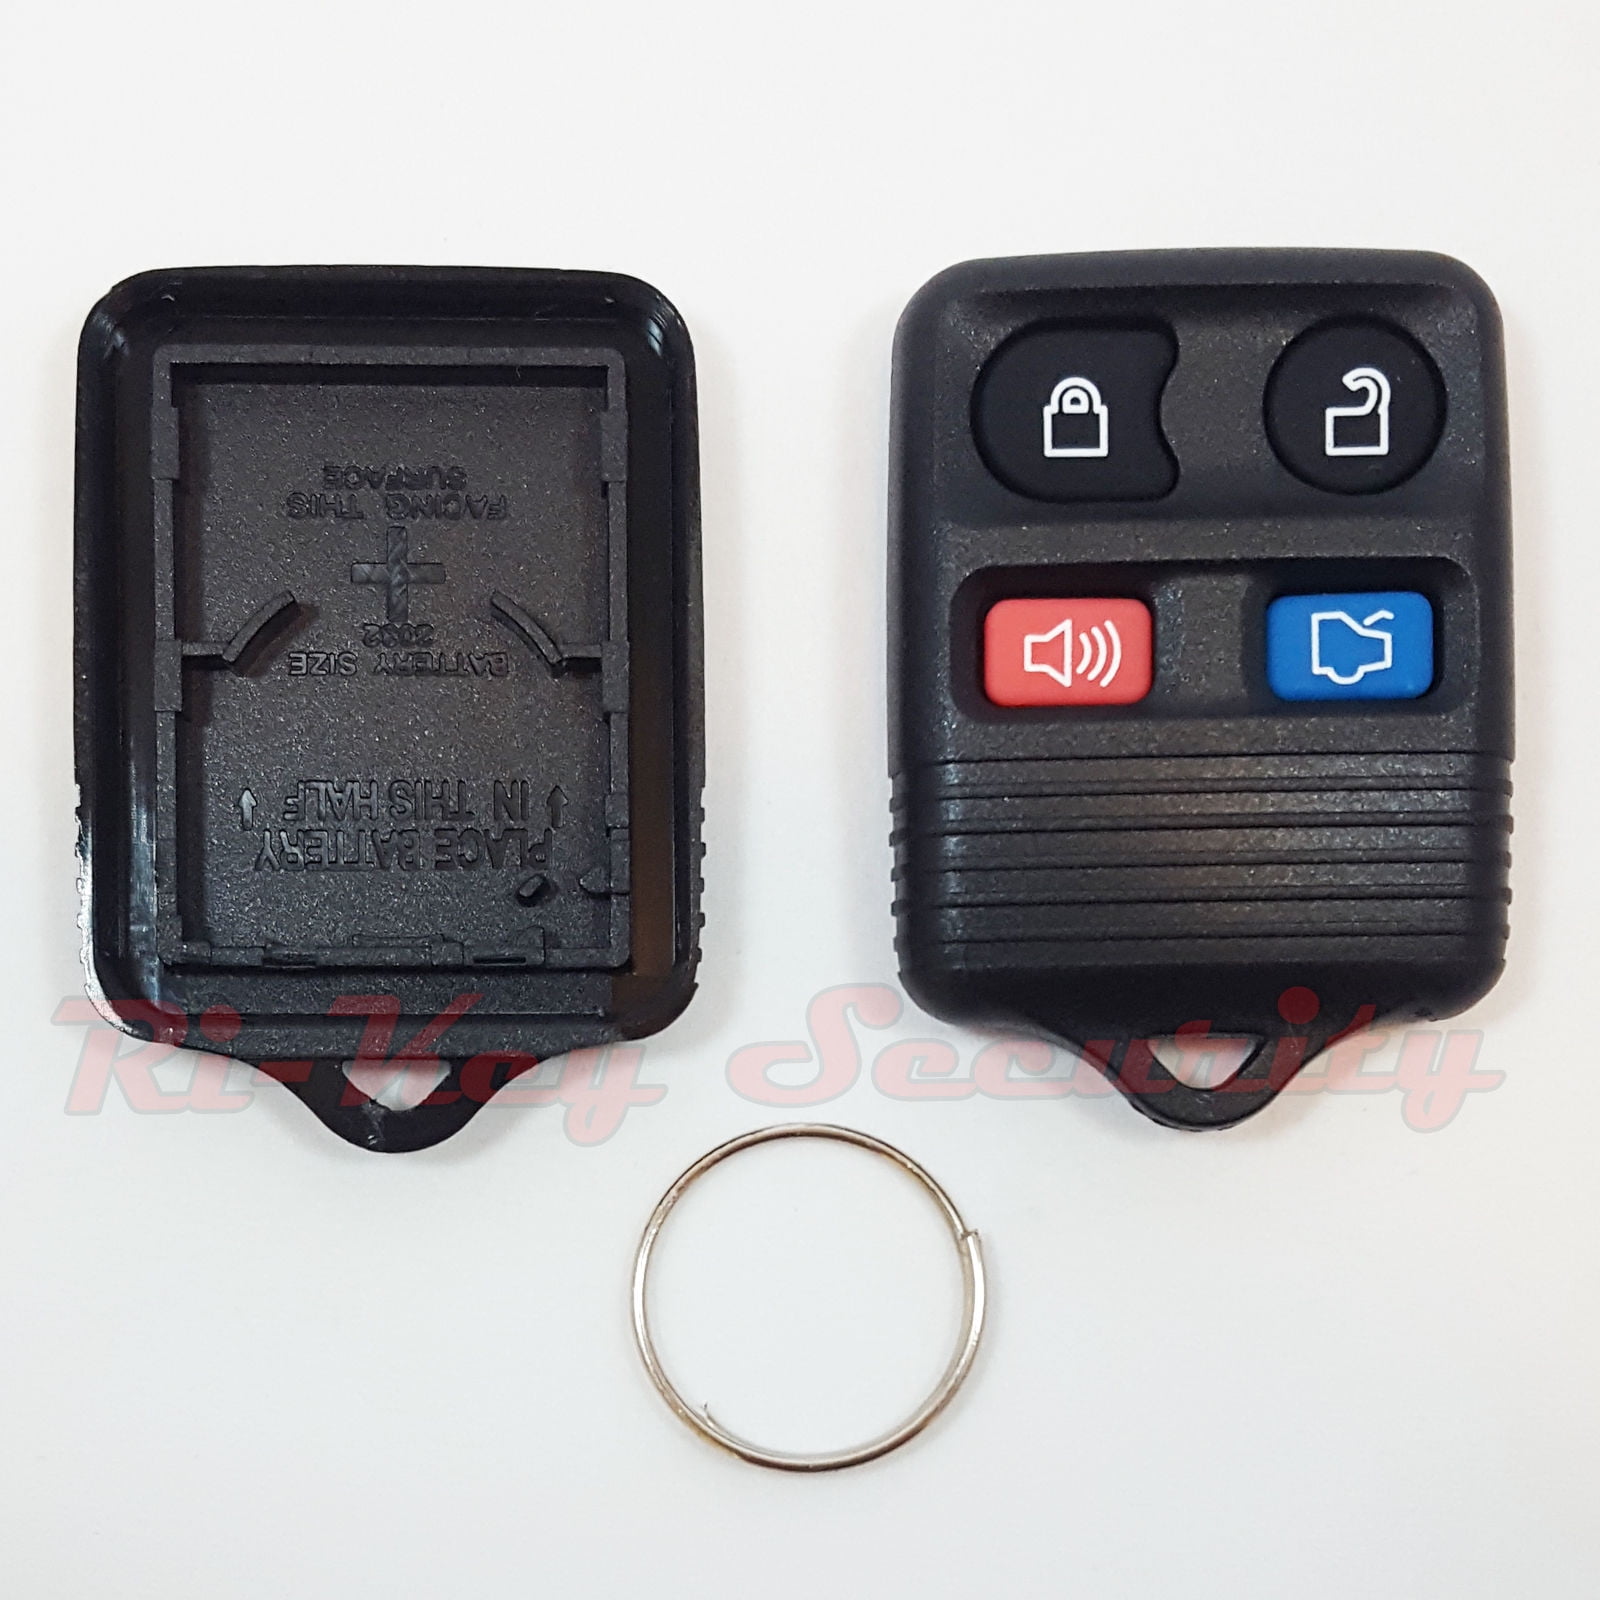 Details about   2x 3 Button Remote Keyless Entry Key Fob Case For  Ford F150 F250 F550 1999-2016 